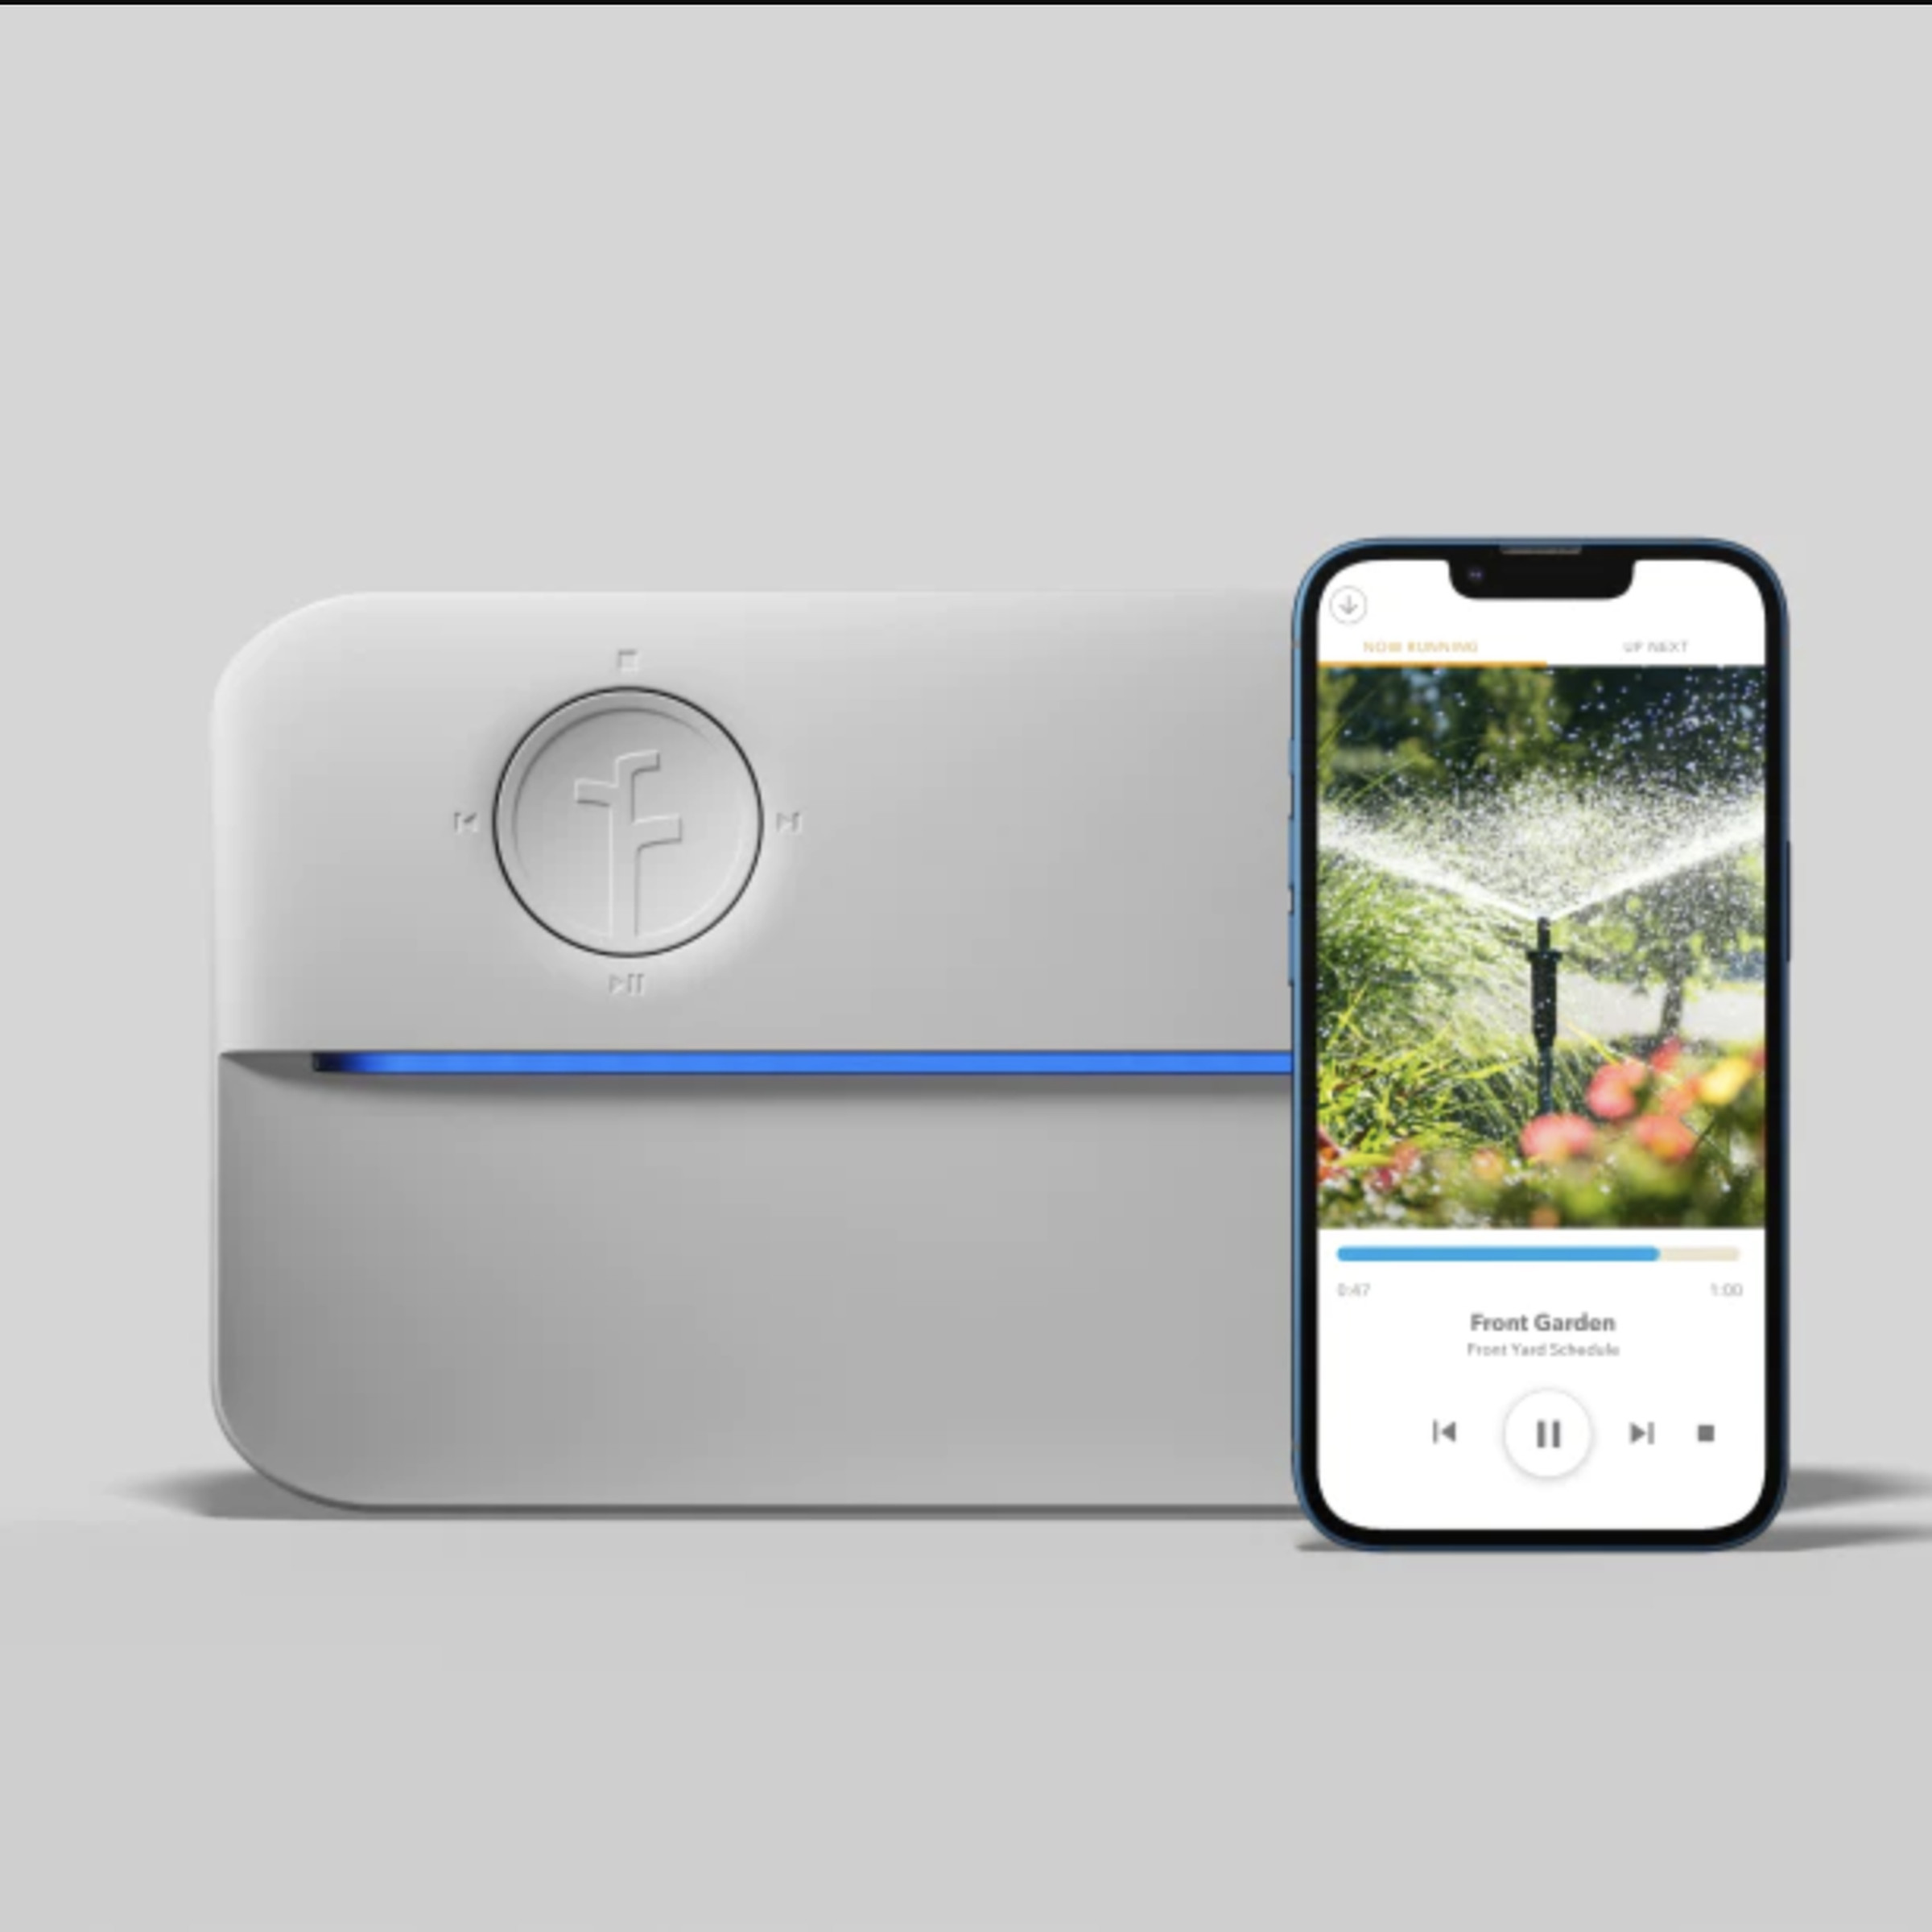 Rachio sprinker controller, a boxy object that’s white with a blue streak running through it lengthwise, and a phone with the app on it.